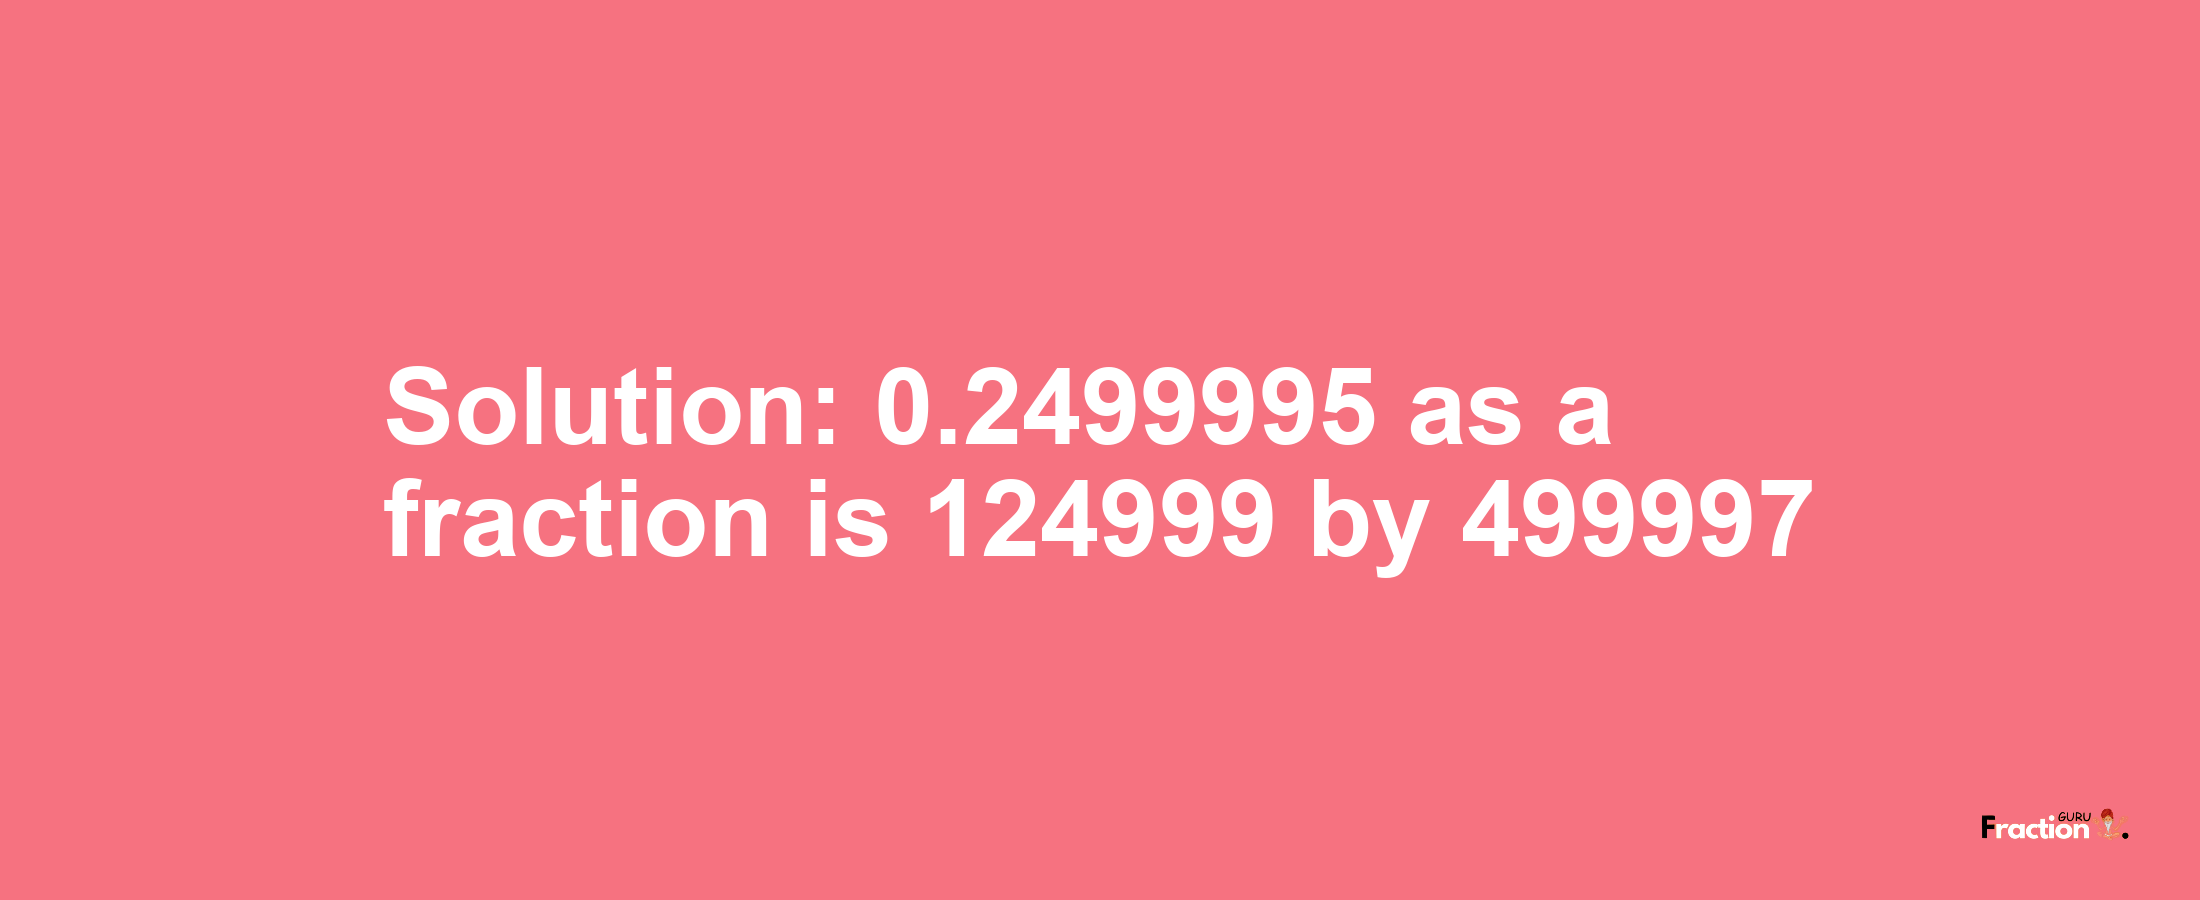 Solution:0.2499995 as a fraction is 124999/499997